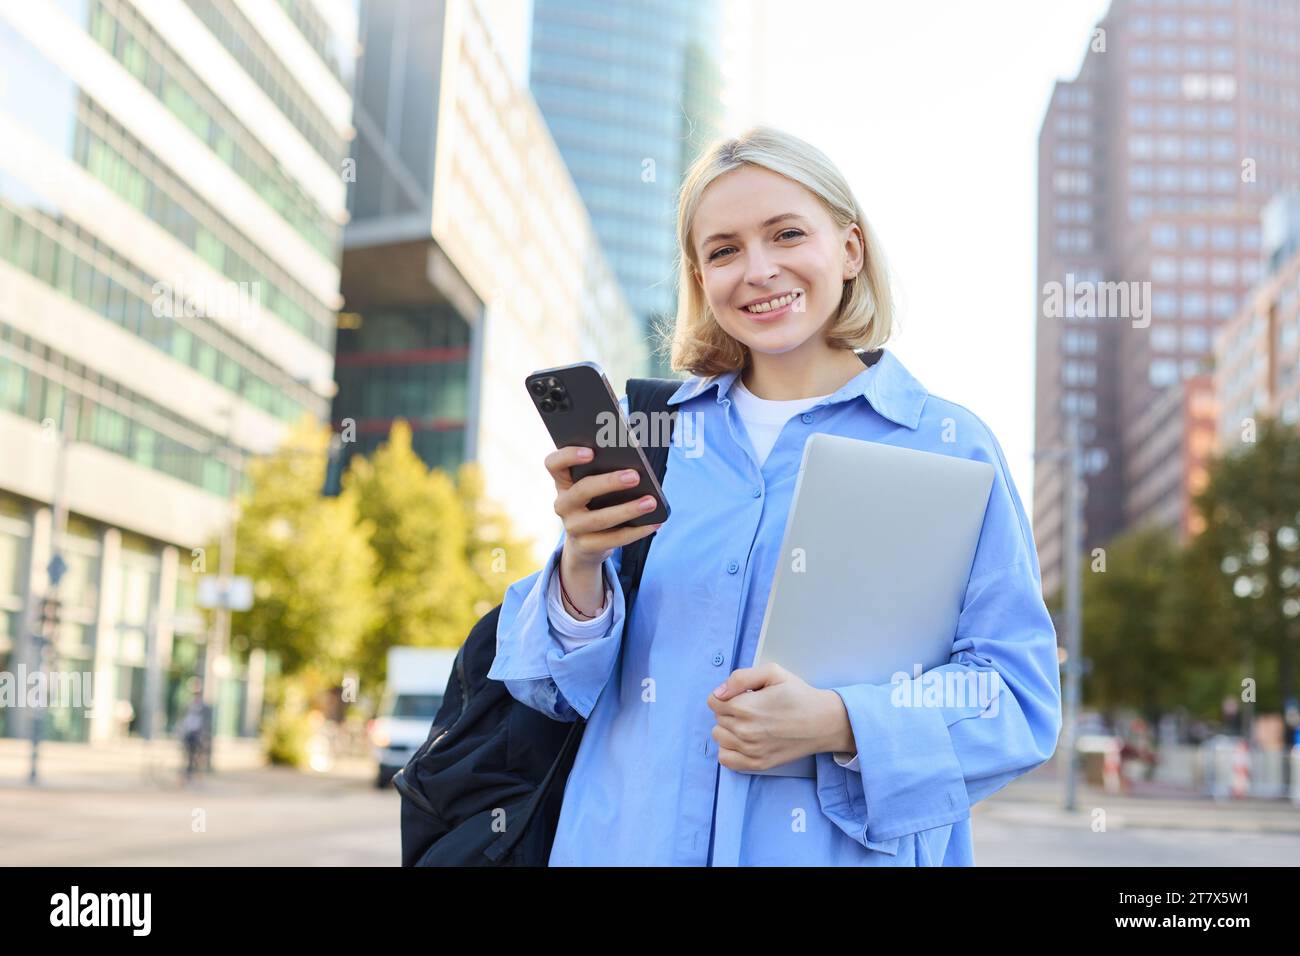 Cheerful smiling blond woman with mobile phone, posing with laptop in city centre, concept of new horizons and education opportunities. Lifestyle port Stock Photo